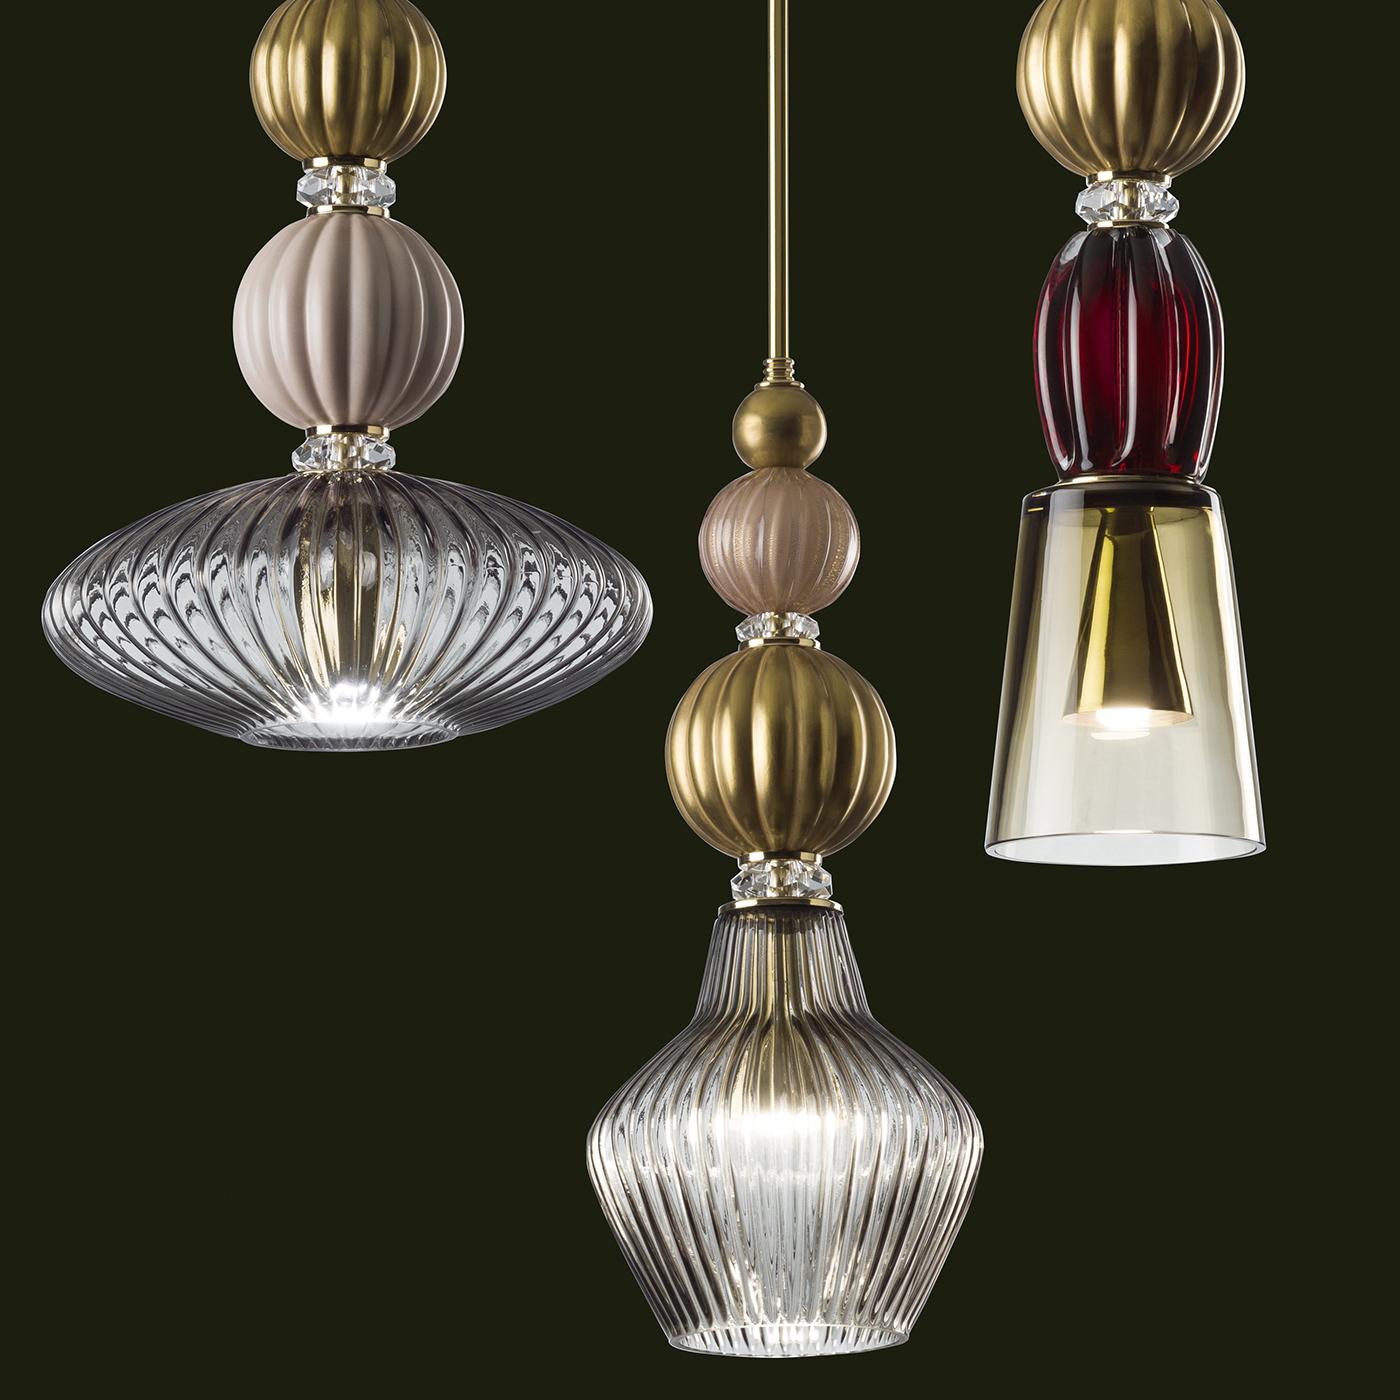 A masterpiece of elegance and artistic craftsmanship, this pendant lamp is a stunning piece of functional decor. Its vertical stem in brass (adjustable and max 200 cm high) is adorned with a stack of porcelain spheres embellished with delicate